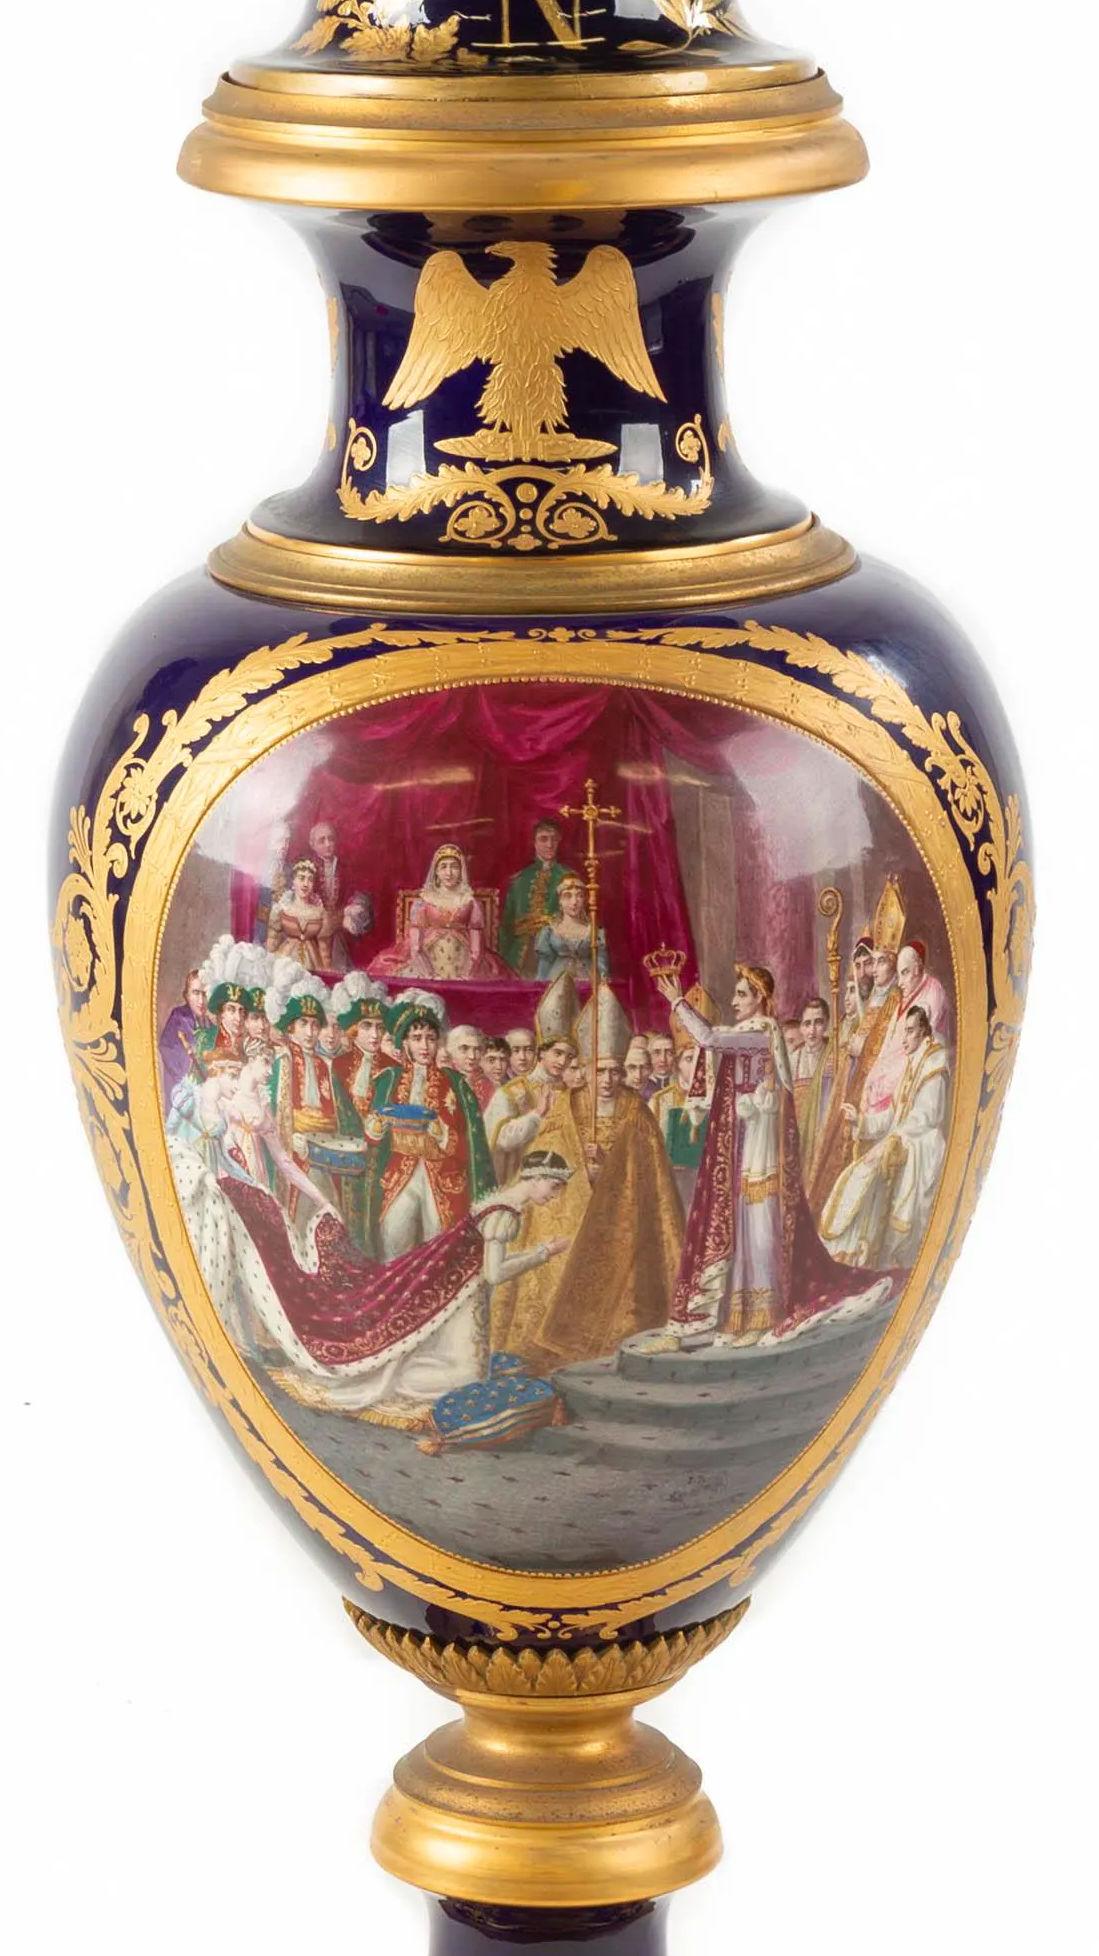 Finest quality French 19th century large antique sevres style Napoleonic vase.
Hand painted depicting Napoleon's Coronation. Signed by the artist after a painting by Jacque David in the Louvre Museum.